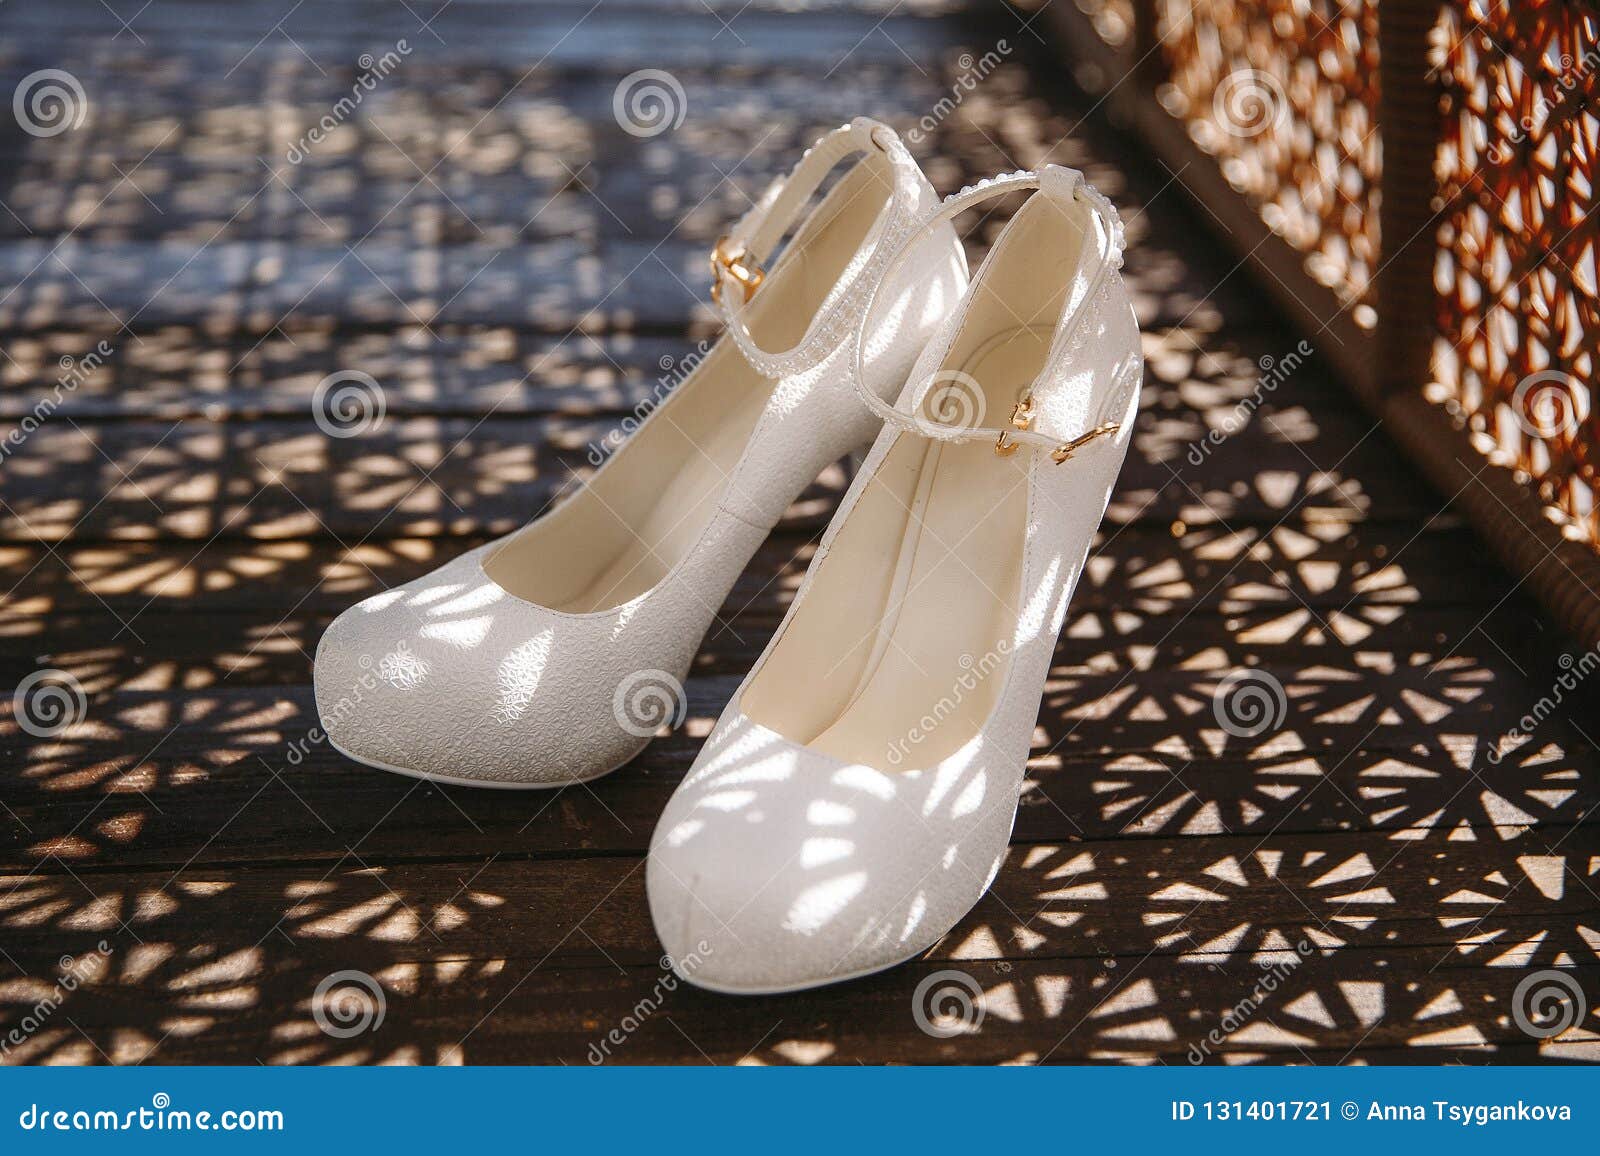 yacht party shoes